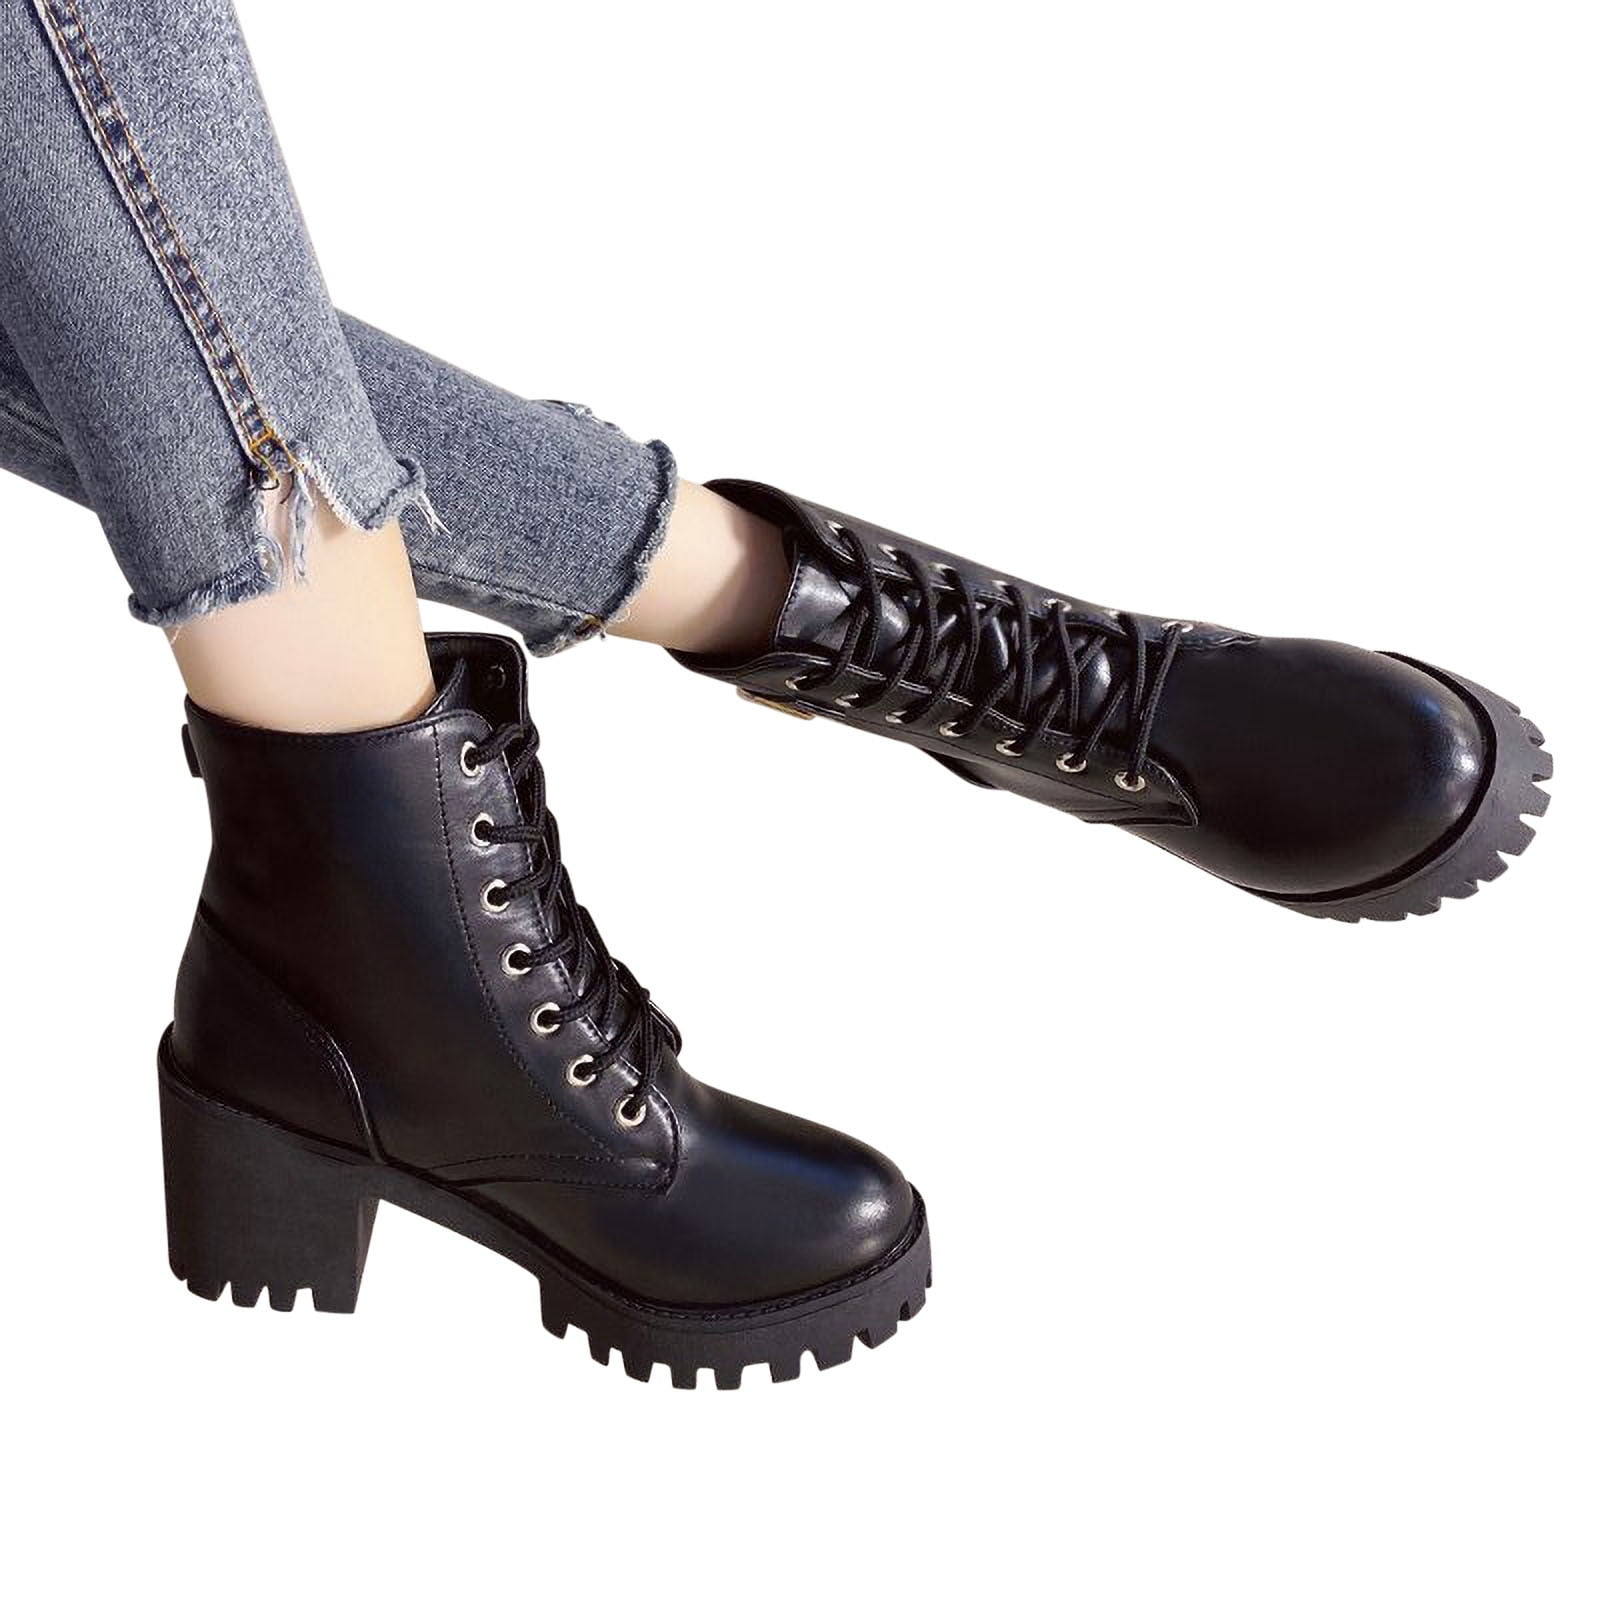 New Women's Lace Up Combat Ankle Booties Boot Chunky High